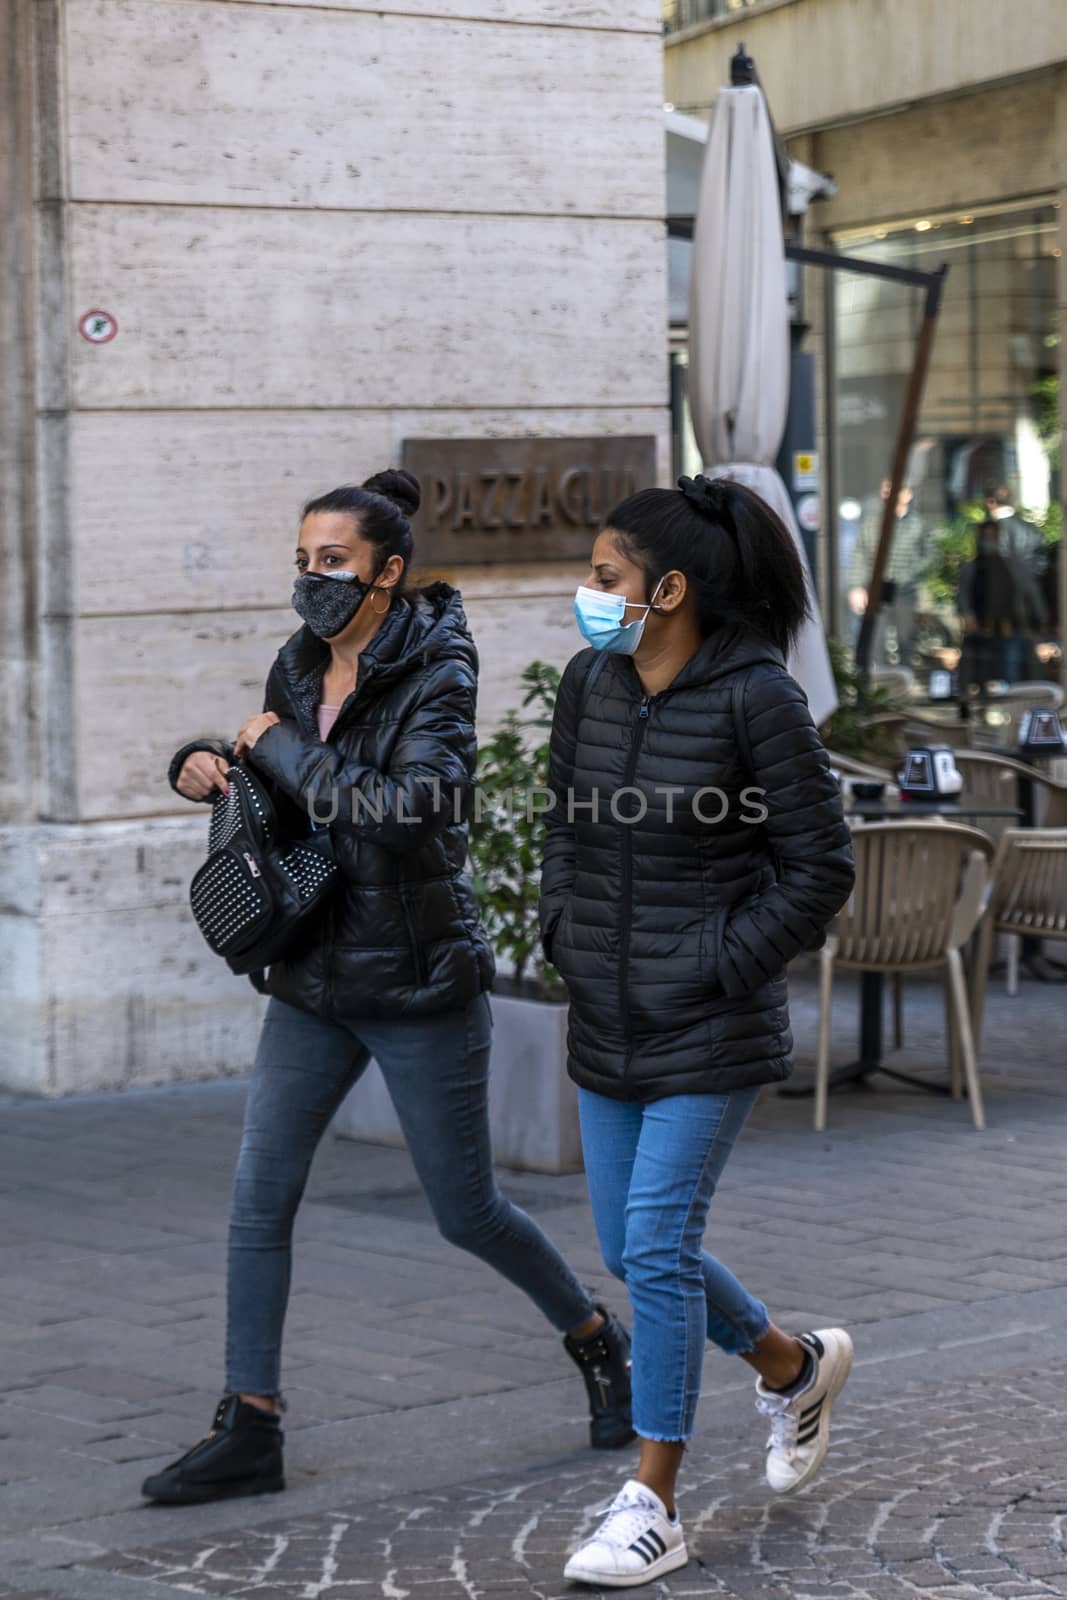 terni,italy october 21 2020:two women with medical mask walking in the city center